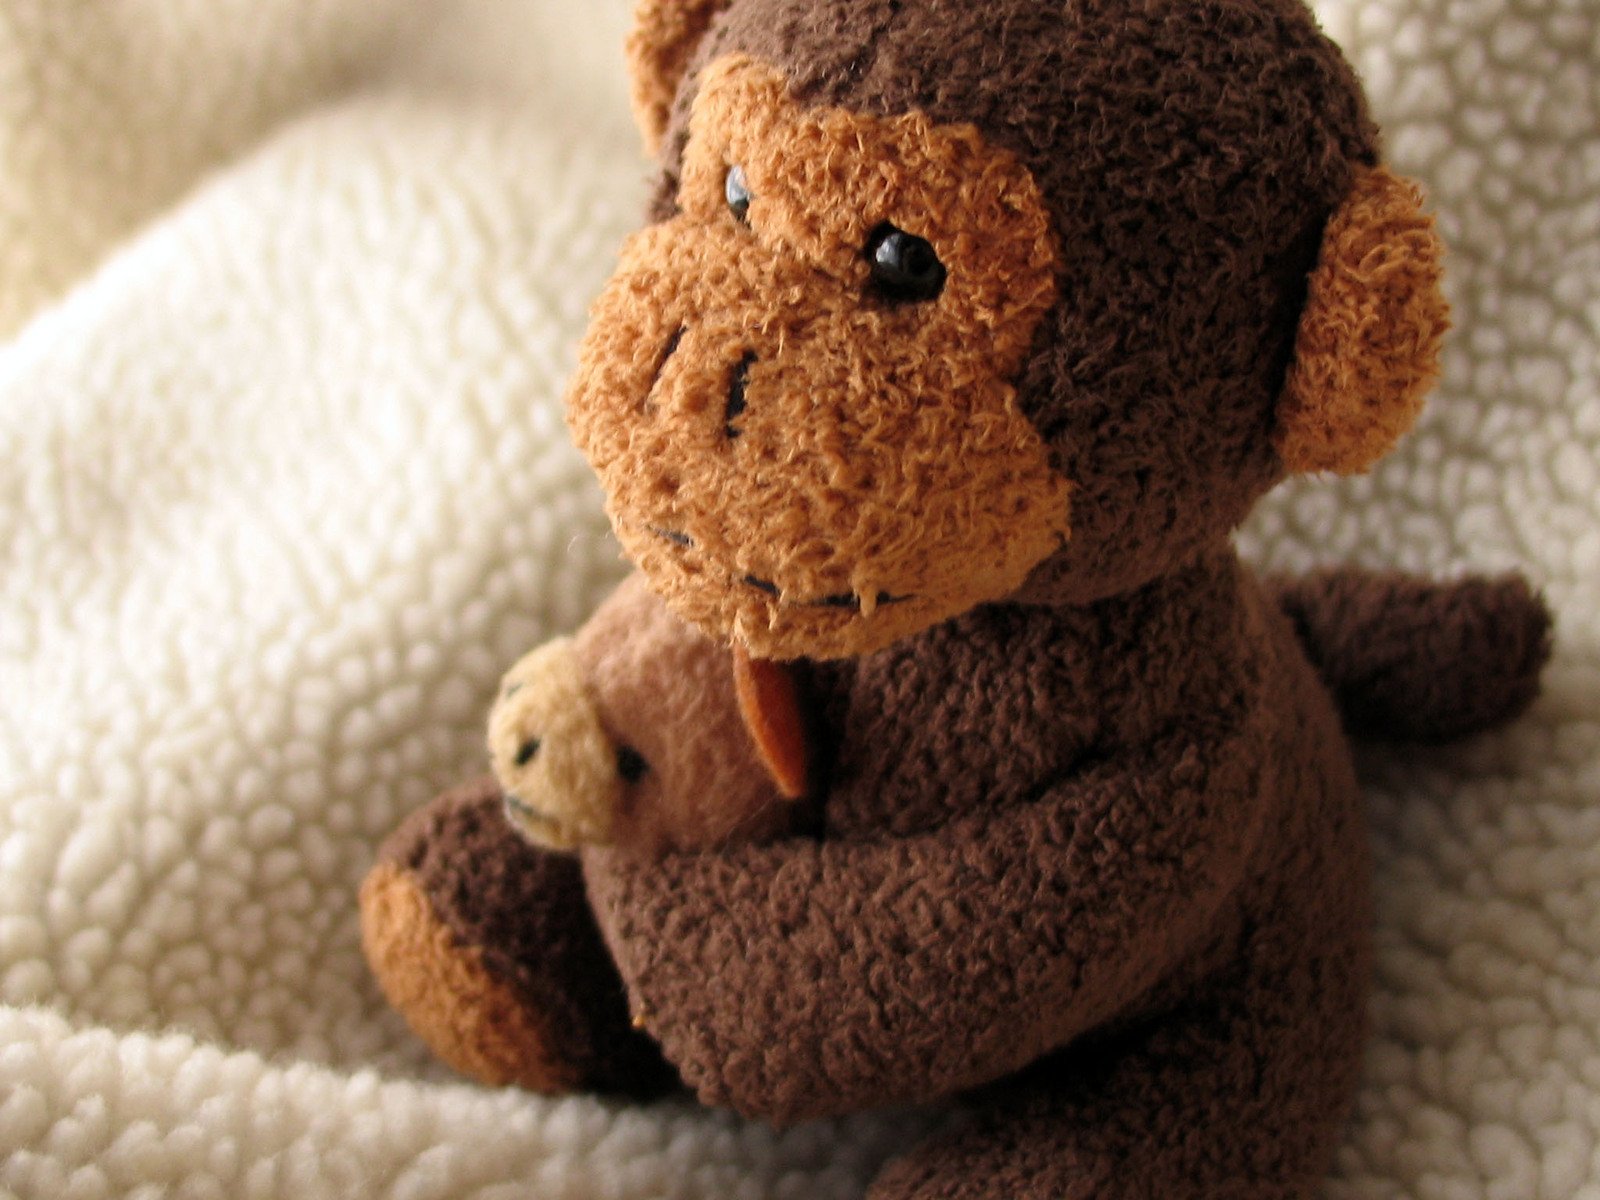 a small brown teddy bear sitting on top of a white blanket